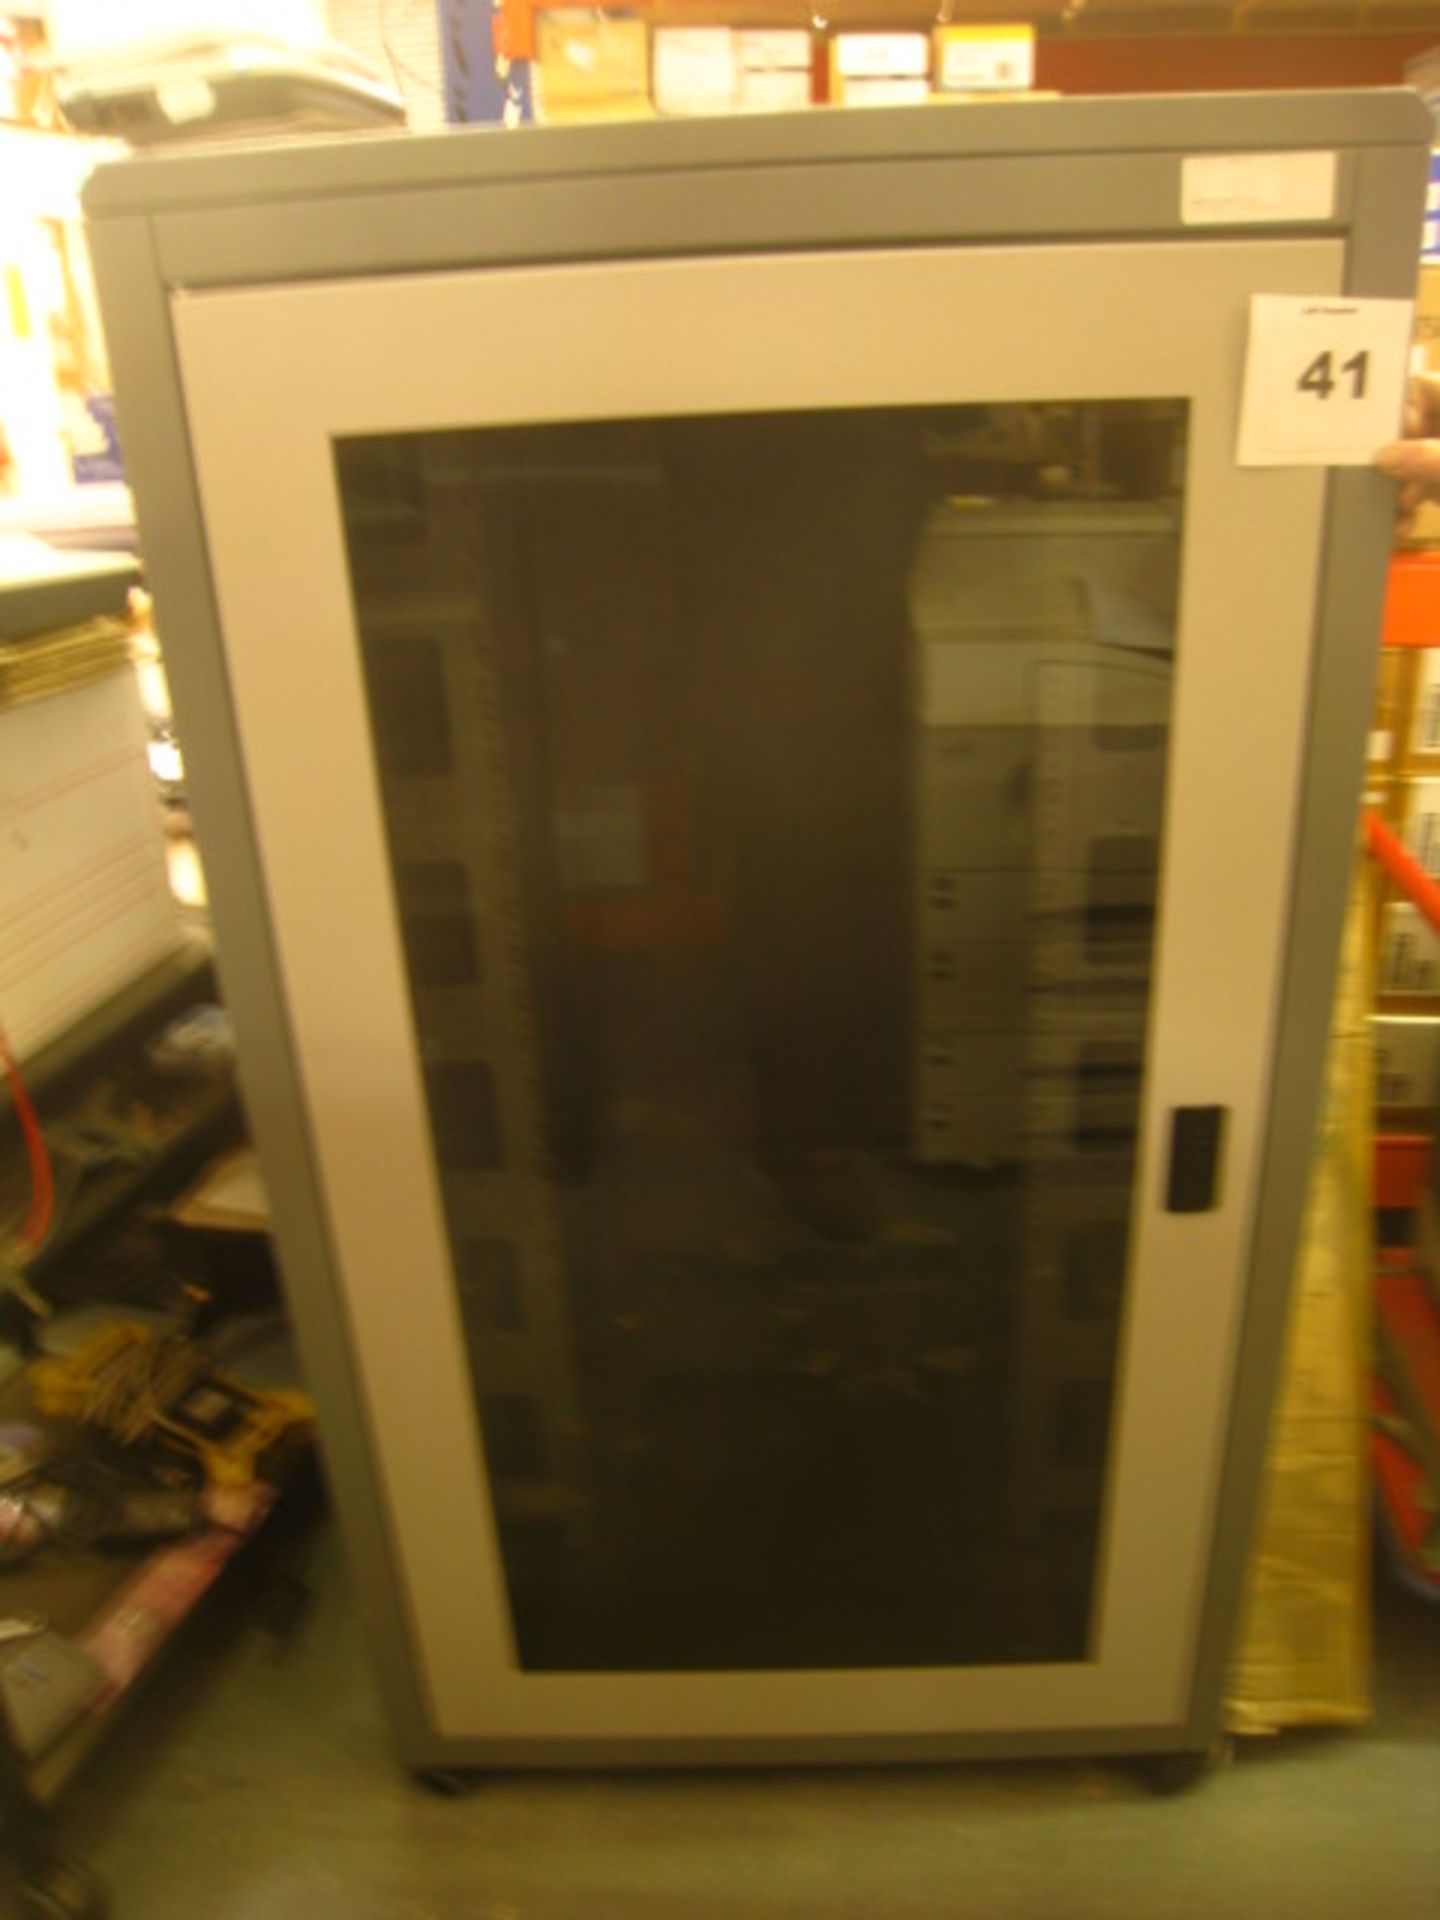 Substantial freestanding comms cabinet in very clean condition on wheels  with clear front door.